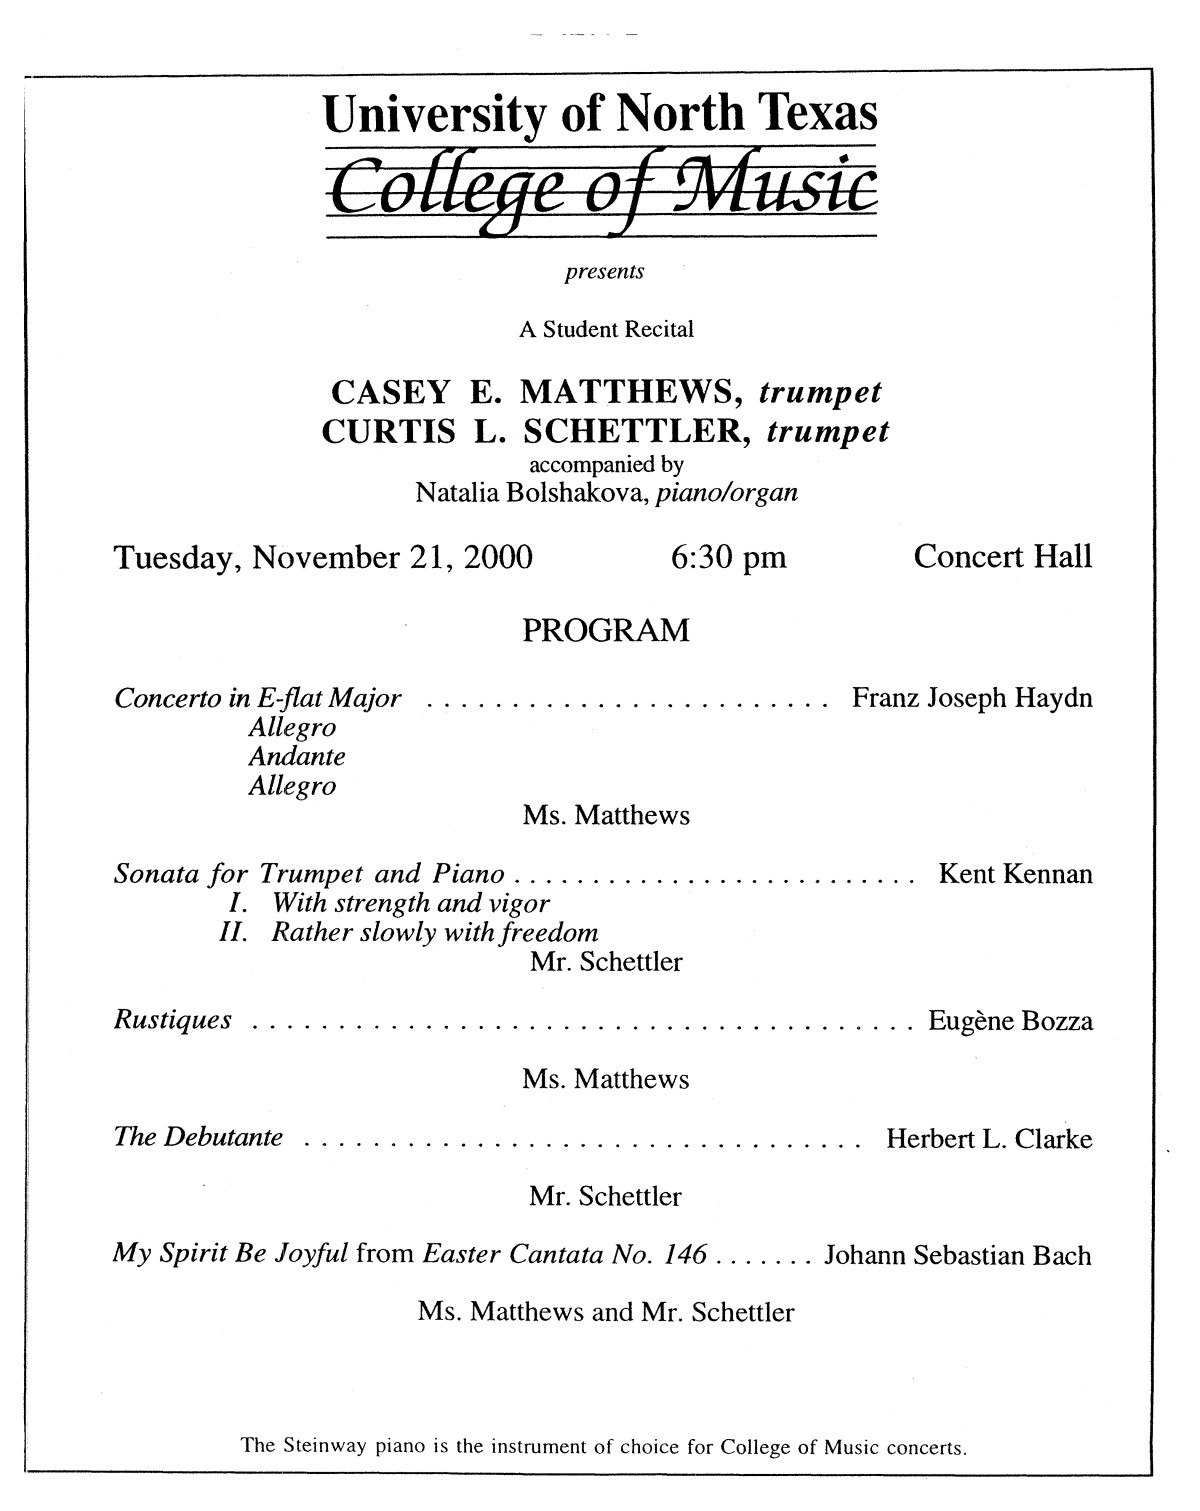 College of Music program book 2000-2001 Student Performances Vol. 2
                                                
                                                    [Sequence #]: 49 of 274
                                                